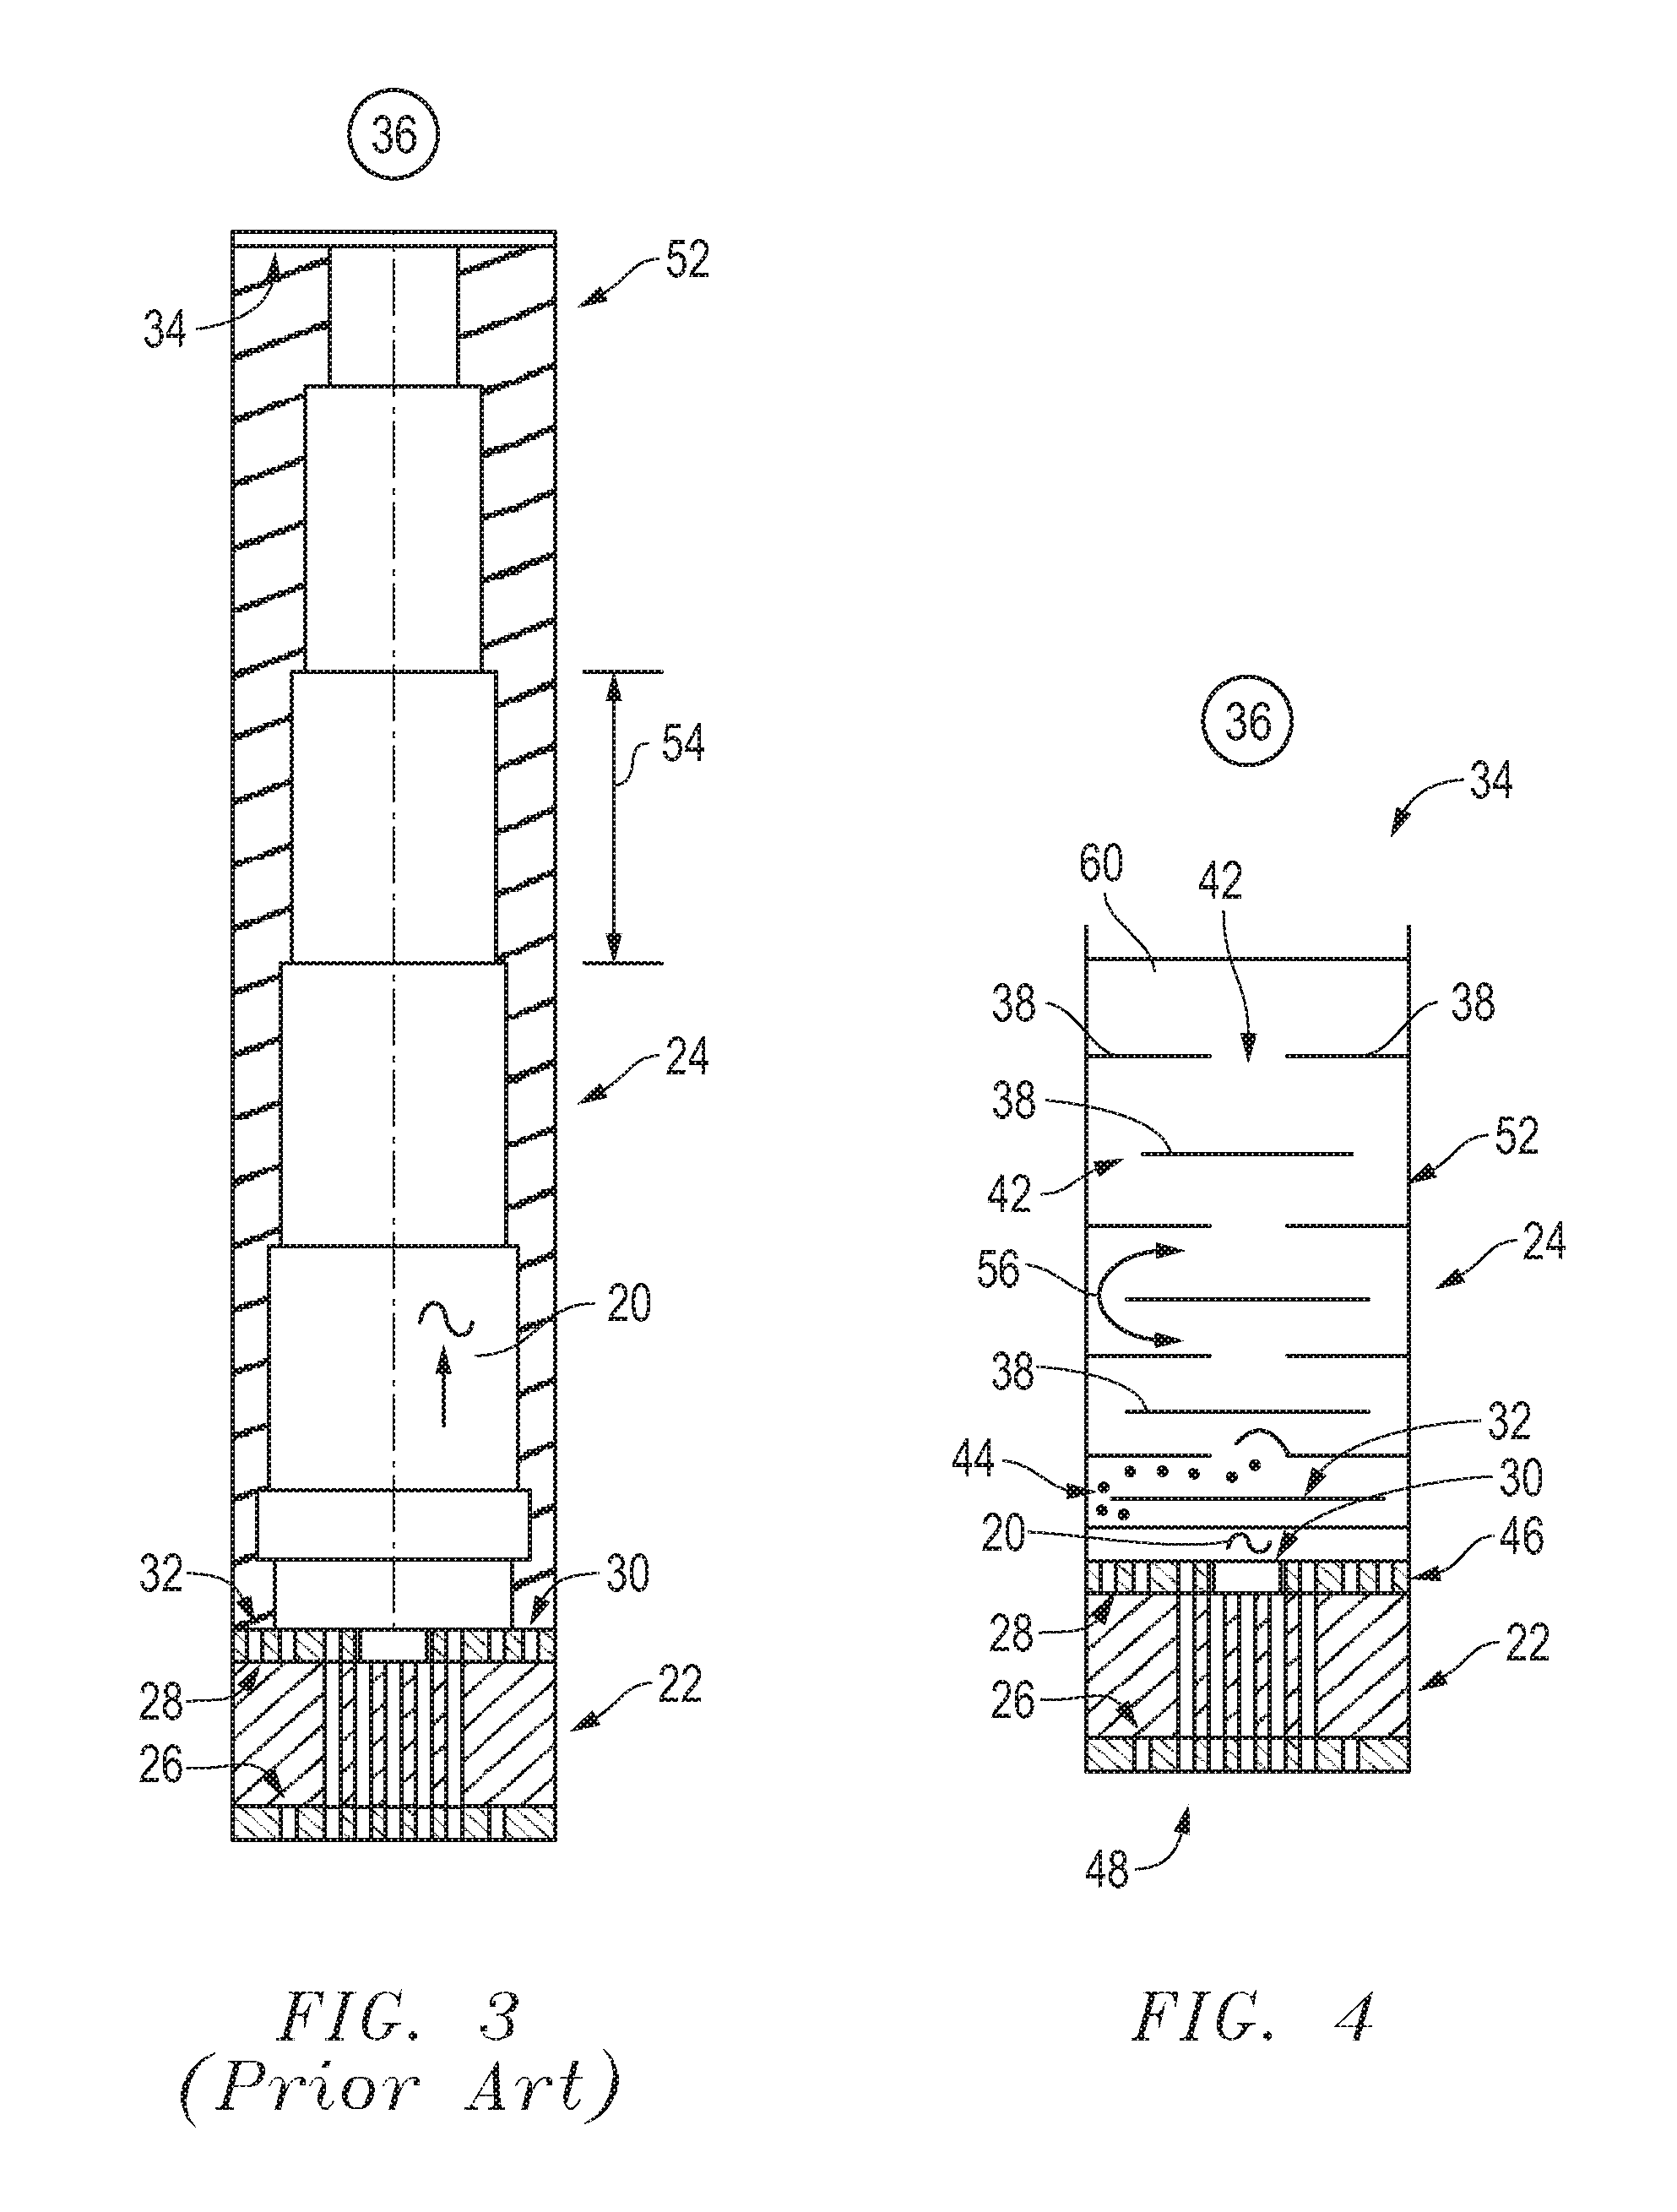 Wideband wide scan antenna matching structure using electrically floating plates